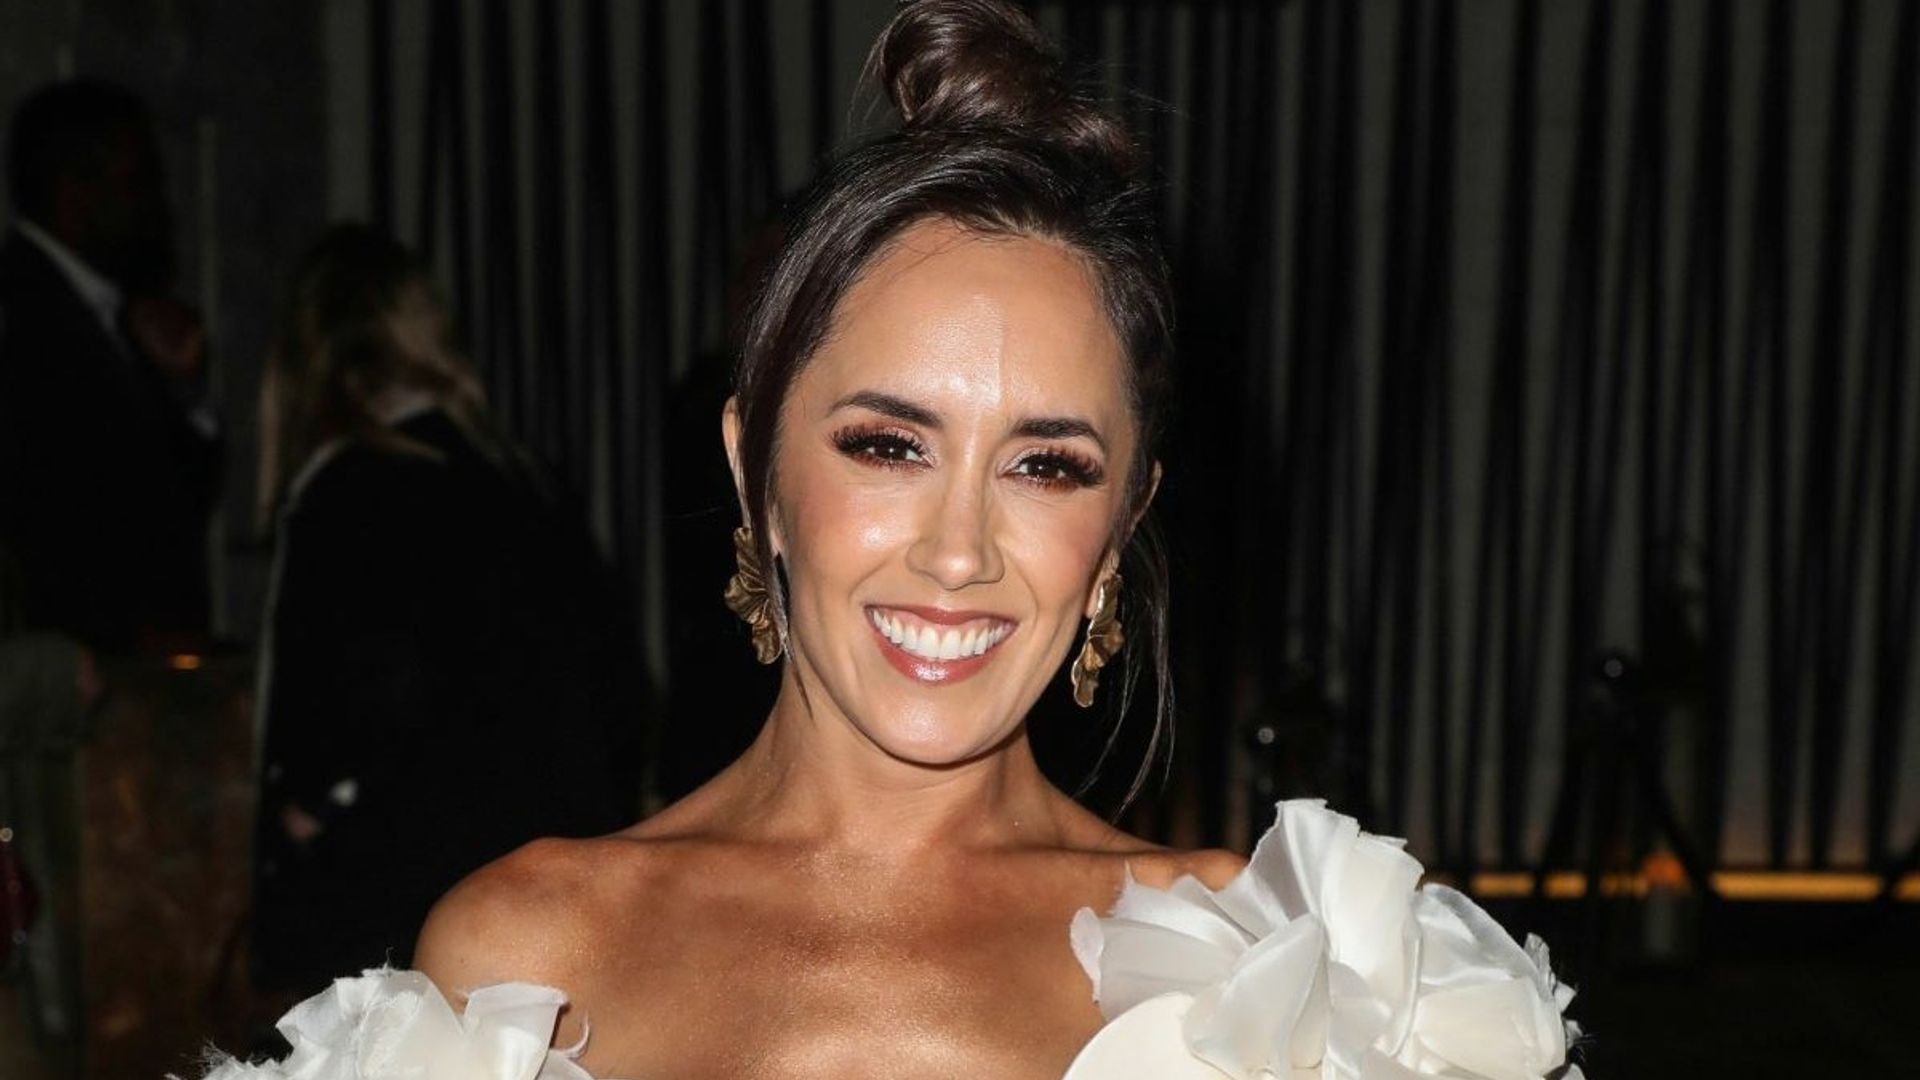 Janette Manrara delights fans with gorgeous new wedding photos